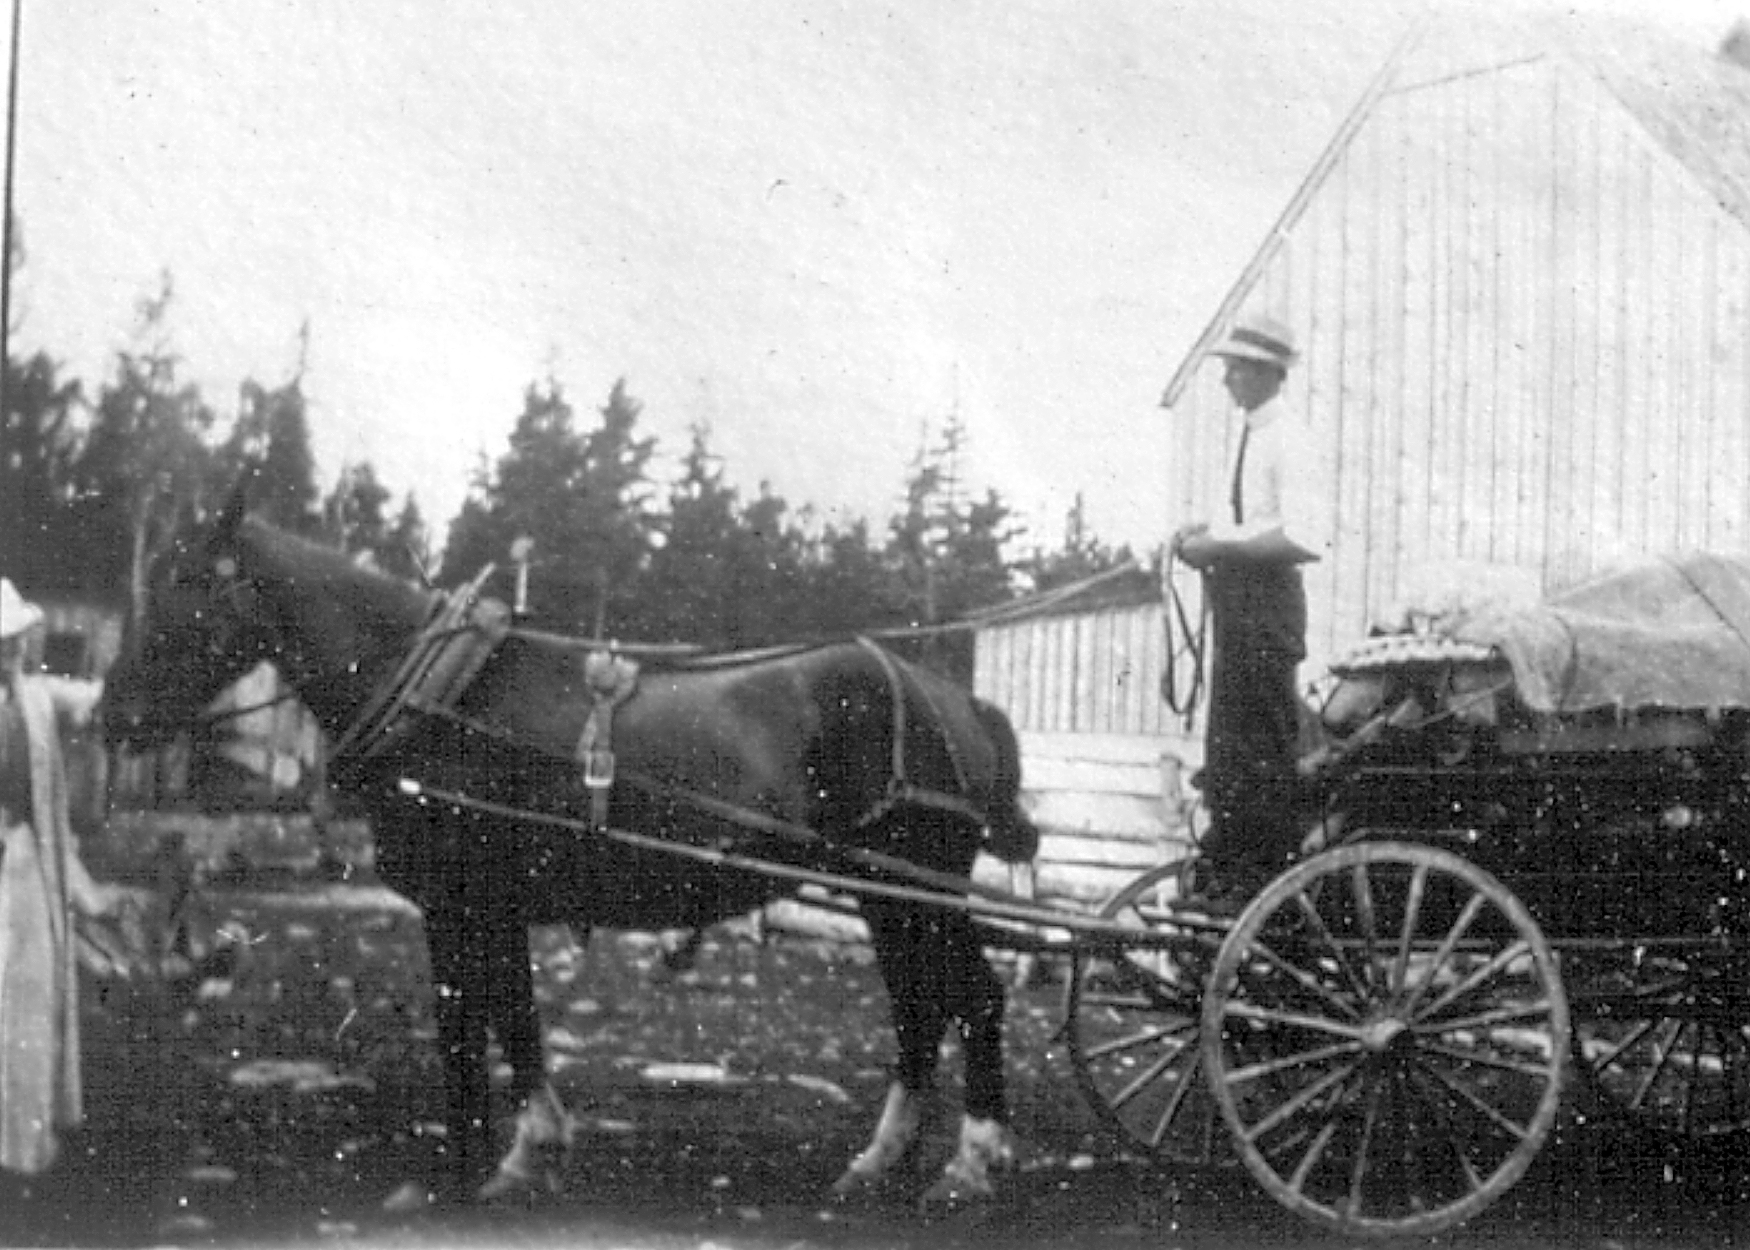 Seymour LaPierre stands with his horse and wagon